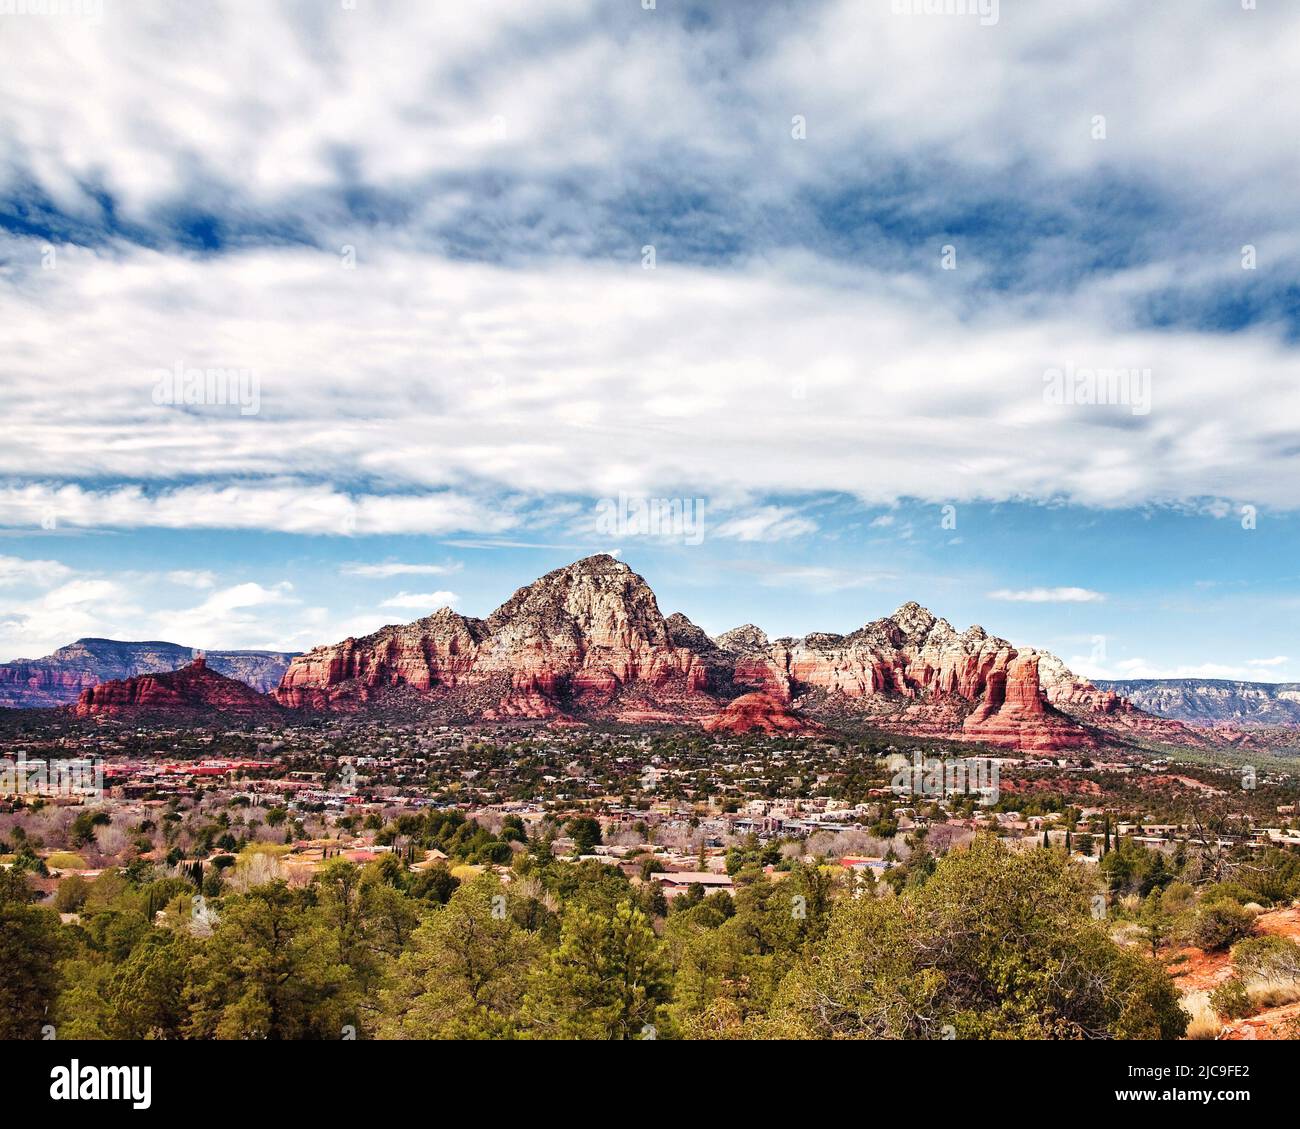 Red Rock formations rise from the landscape bordering West Sedona, Arizona. Stock Photo